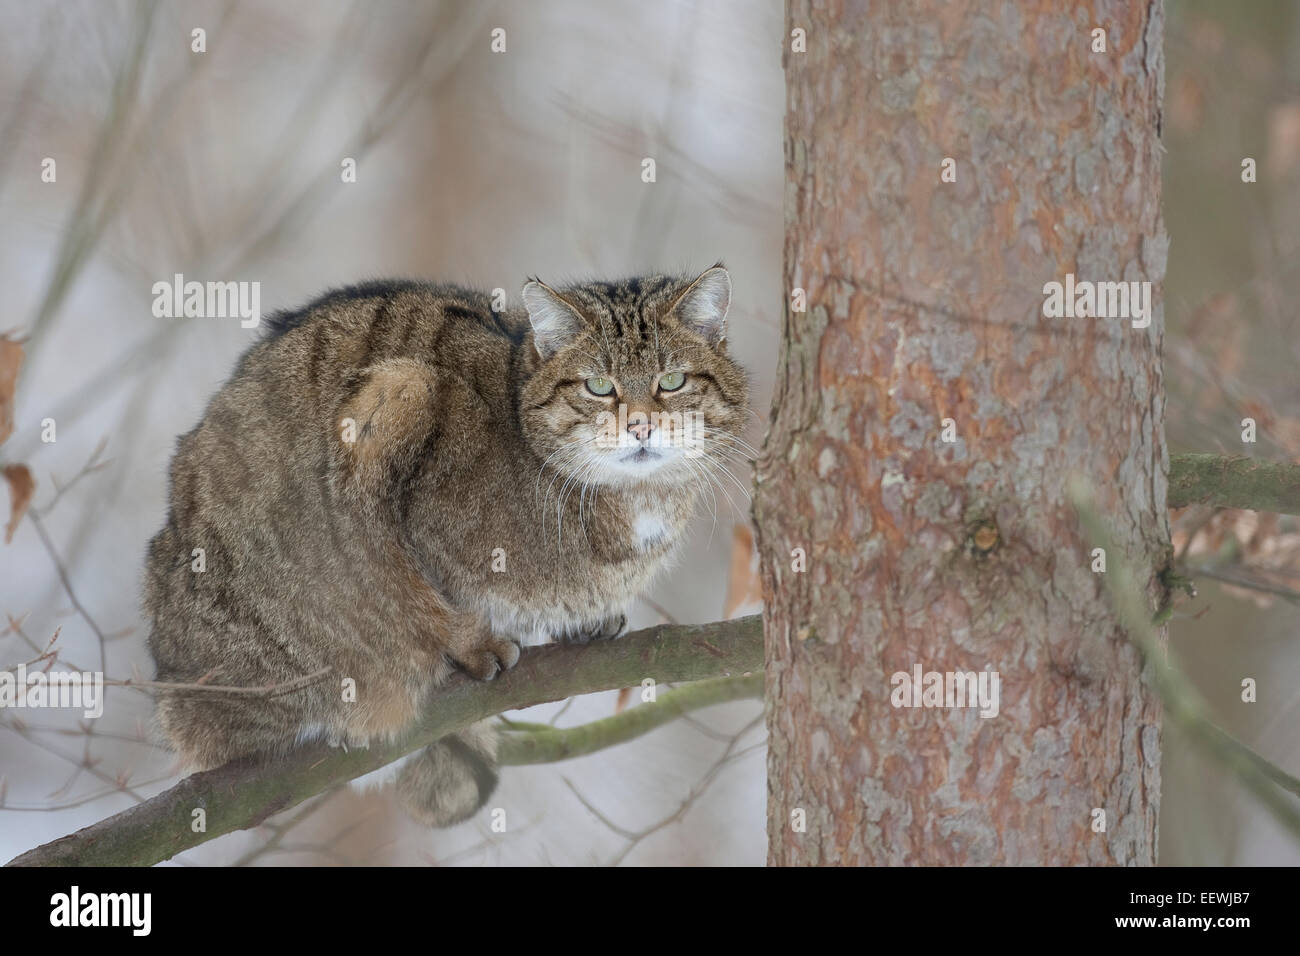 Wildkatze, Wildkatze, Wildkatze, Wild-Katze, Katze, Felis Silvestris, Chat Haret chat Sauvage Stockfoto